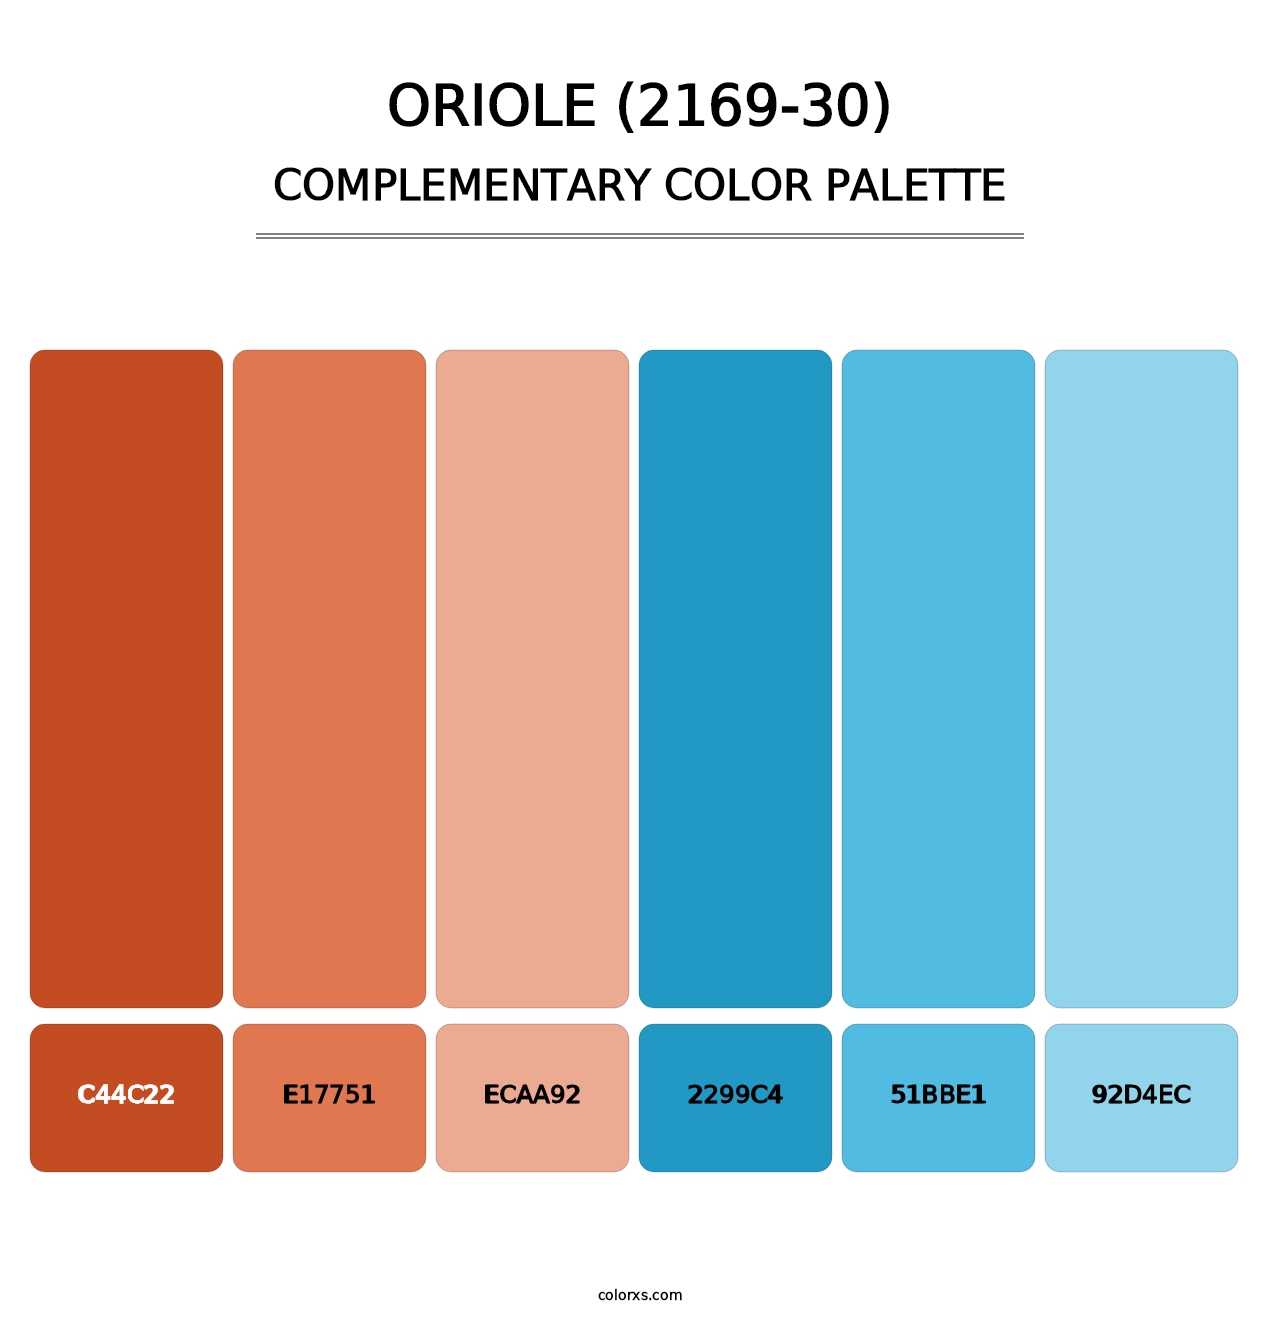 Oriole (2169-30) - Complementary Color Palette